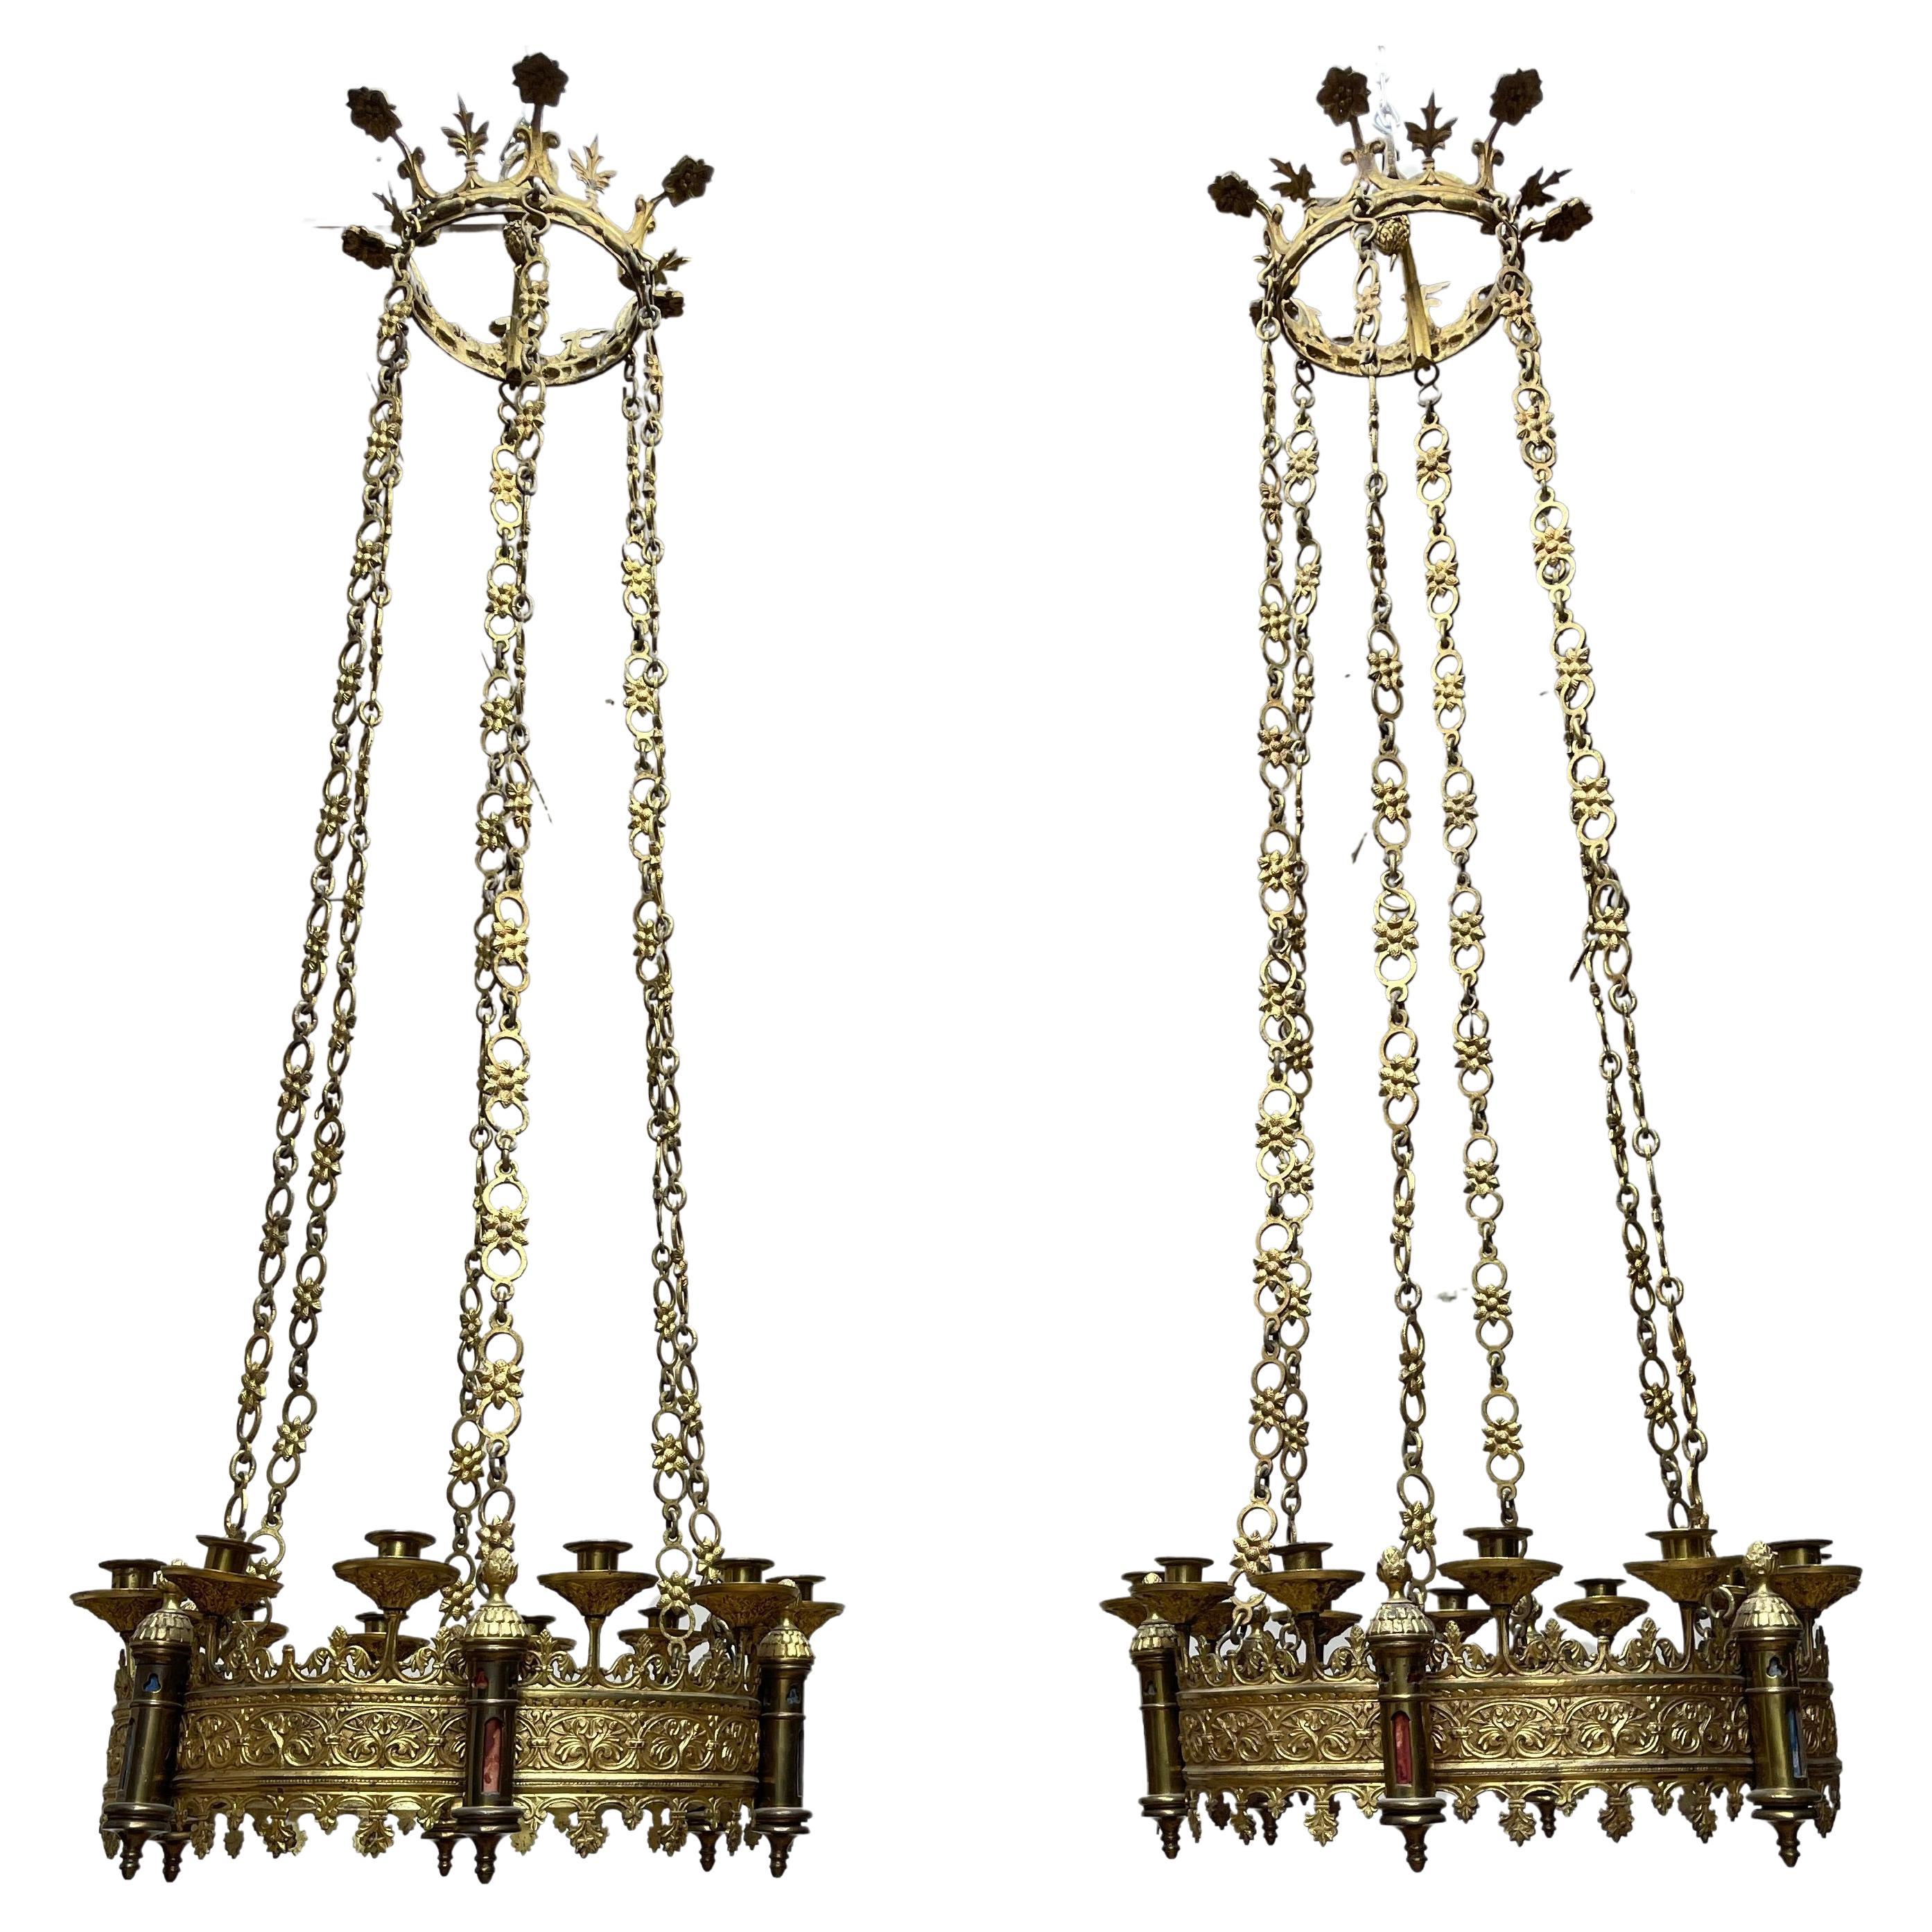 Rare & Striking Pair Gilt Bronze Gothic Revival Advent Wreath Candle Chandeliers